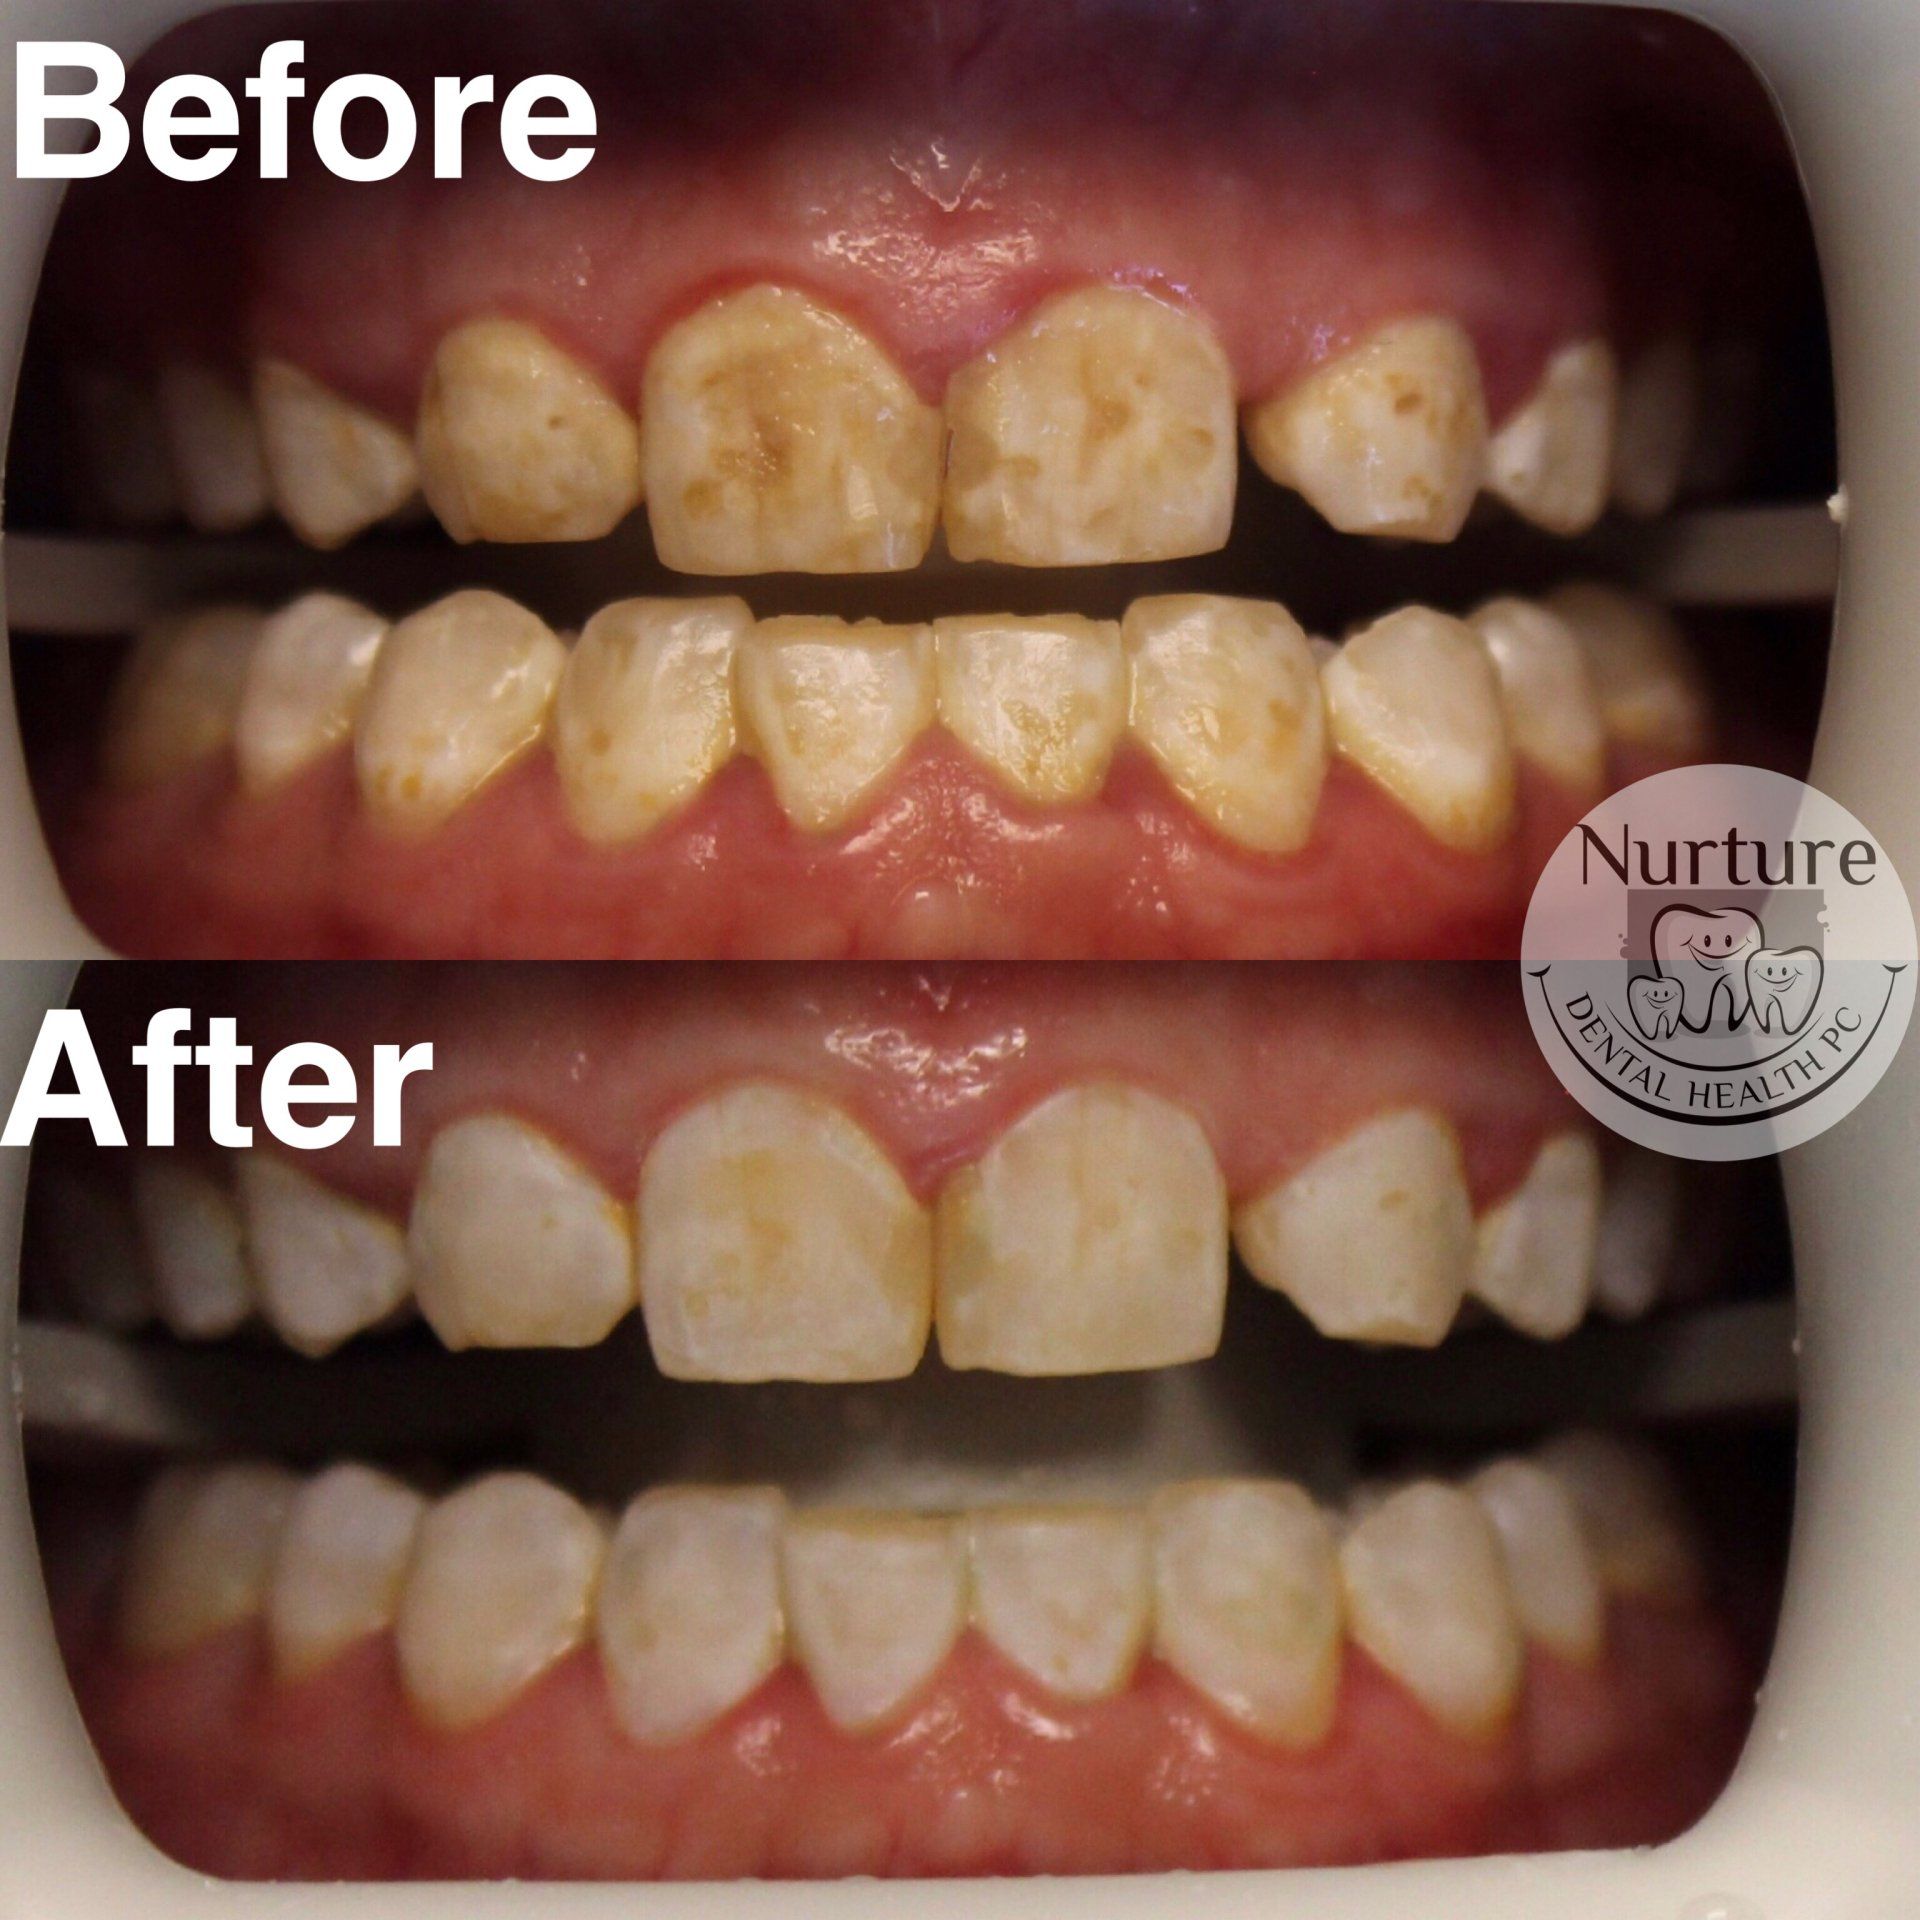 Before and After results of MI Paste treatment series for enamel fluorosis and white or brown spot lesions.